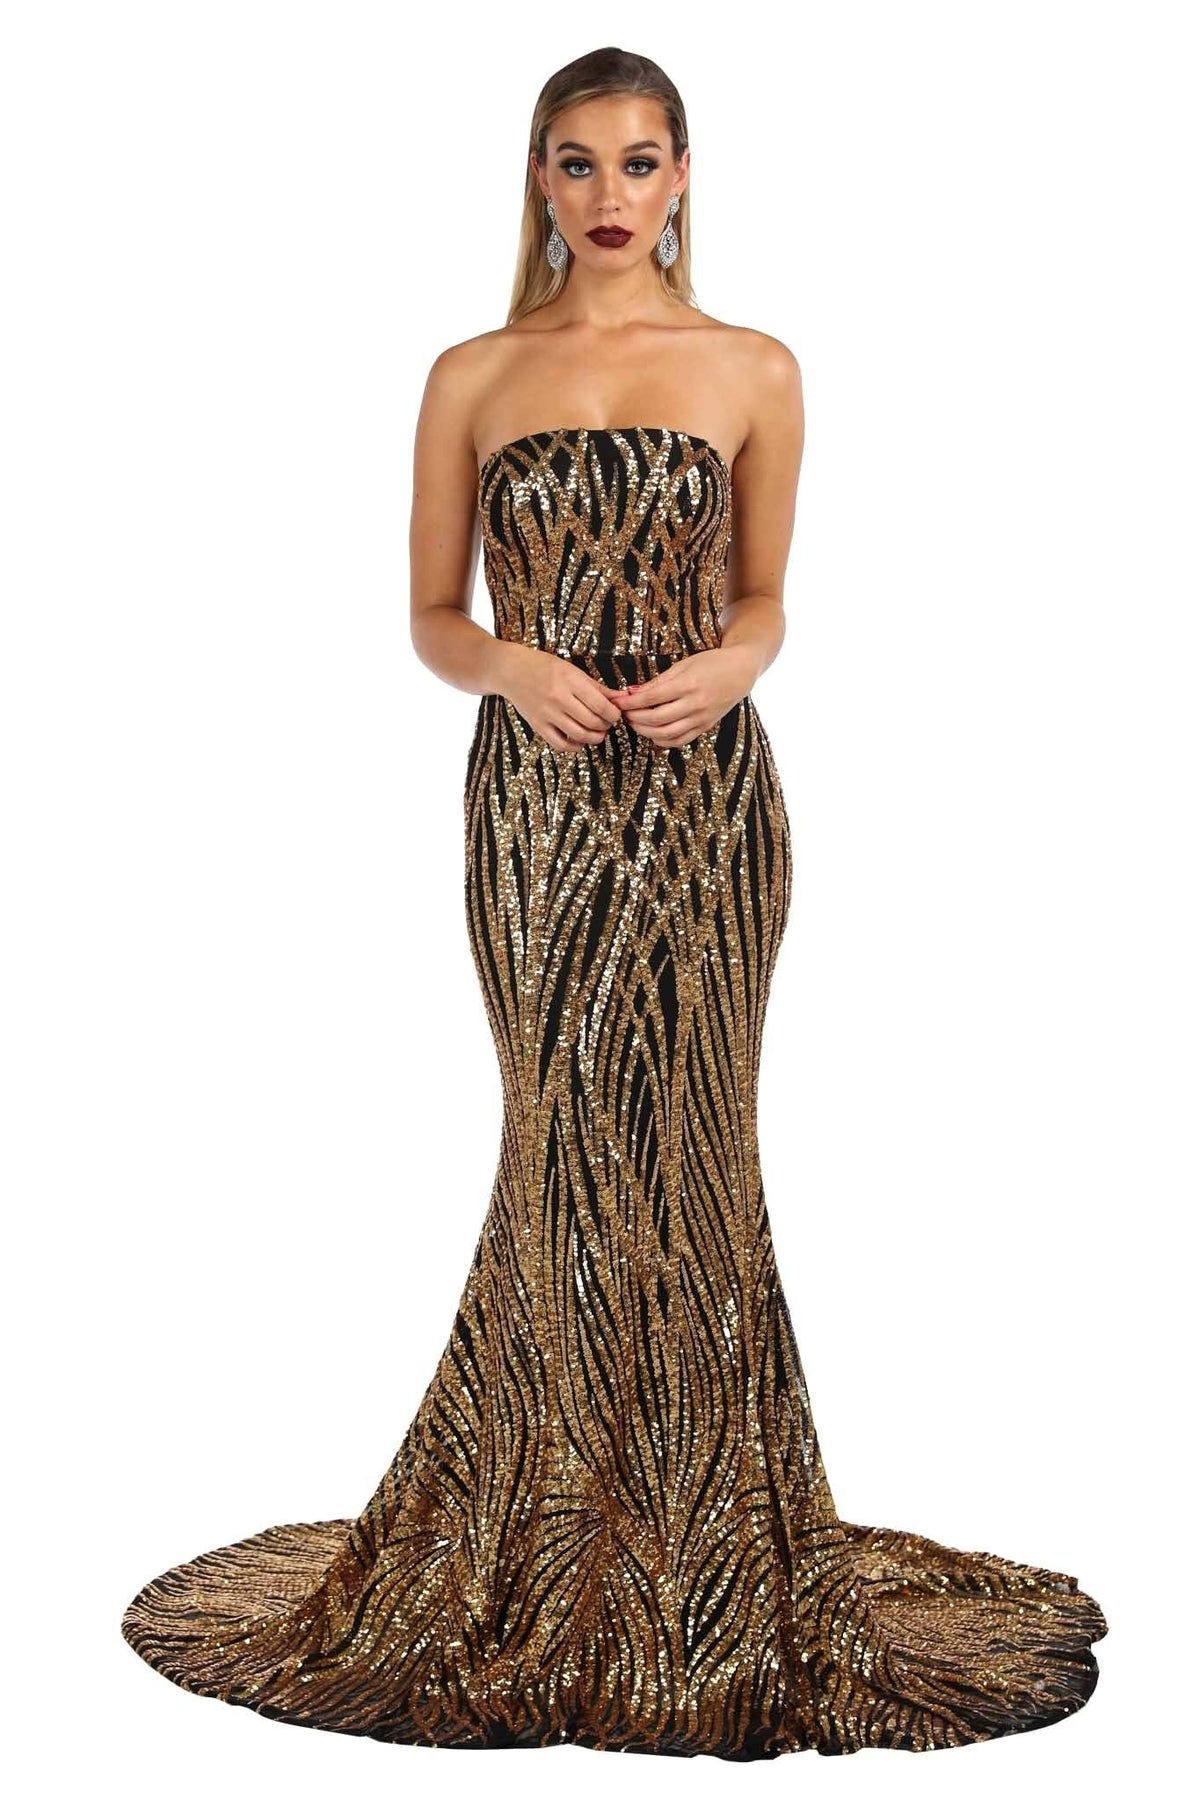 Gold and Black sequin prom formal long gown features strapless straight neckline, fishtail and long train design